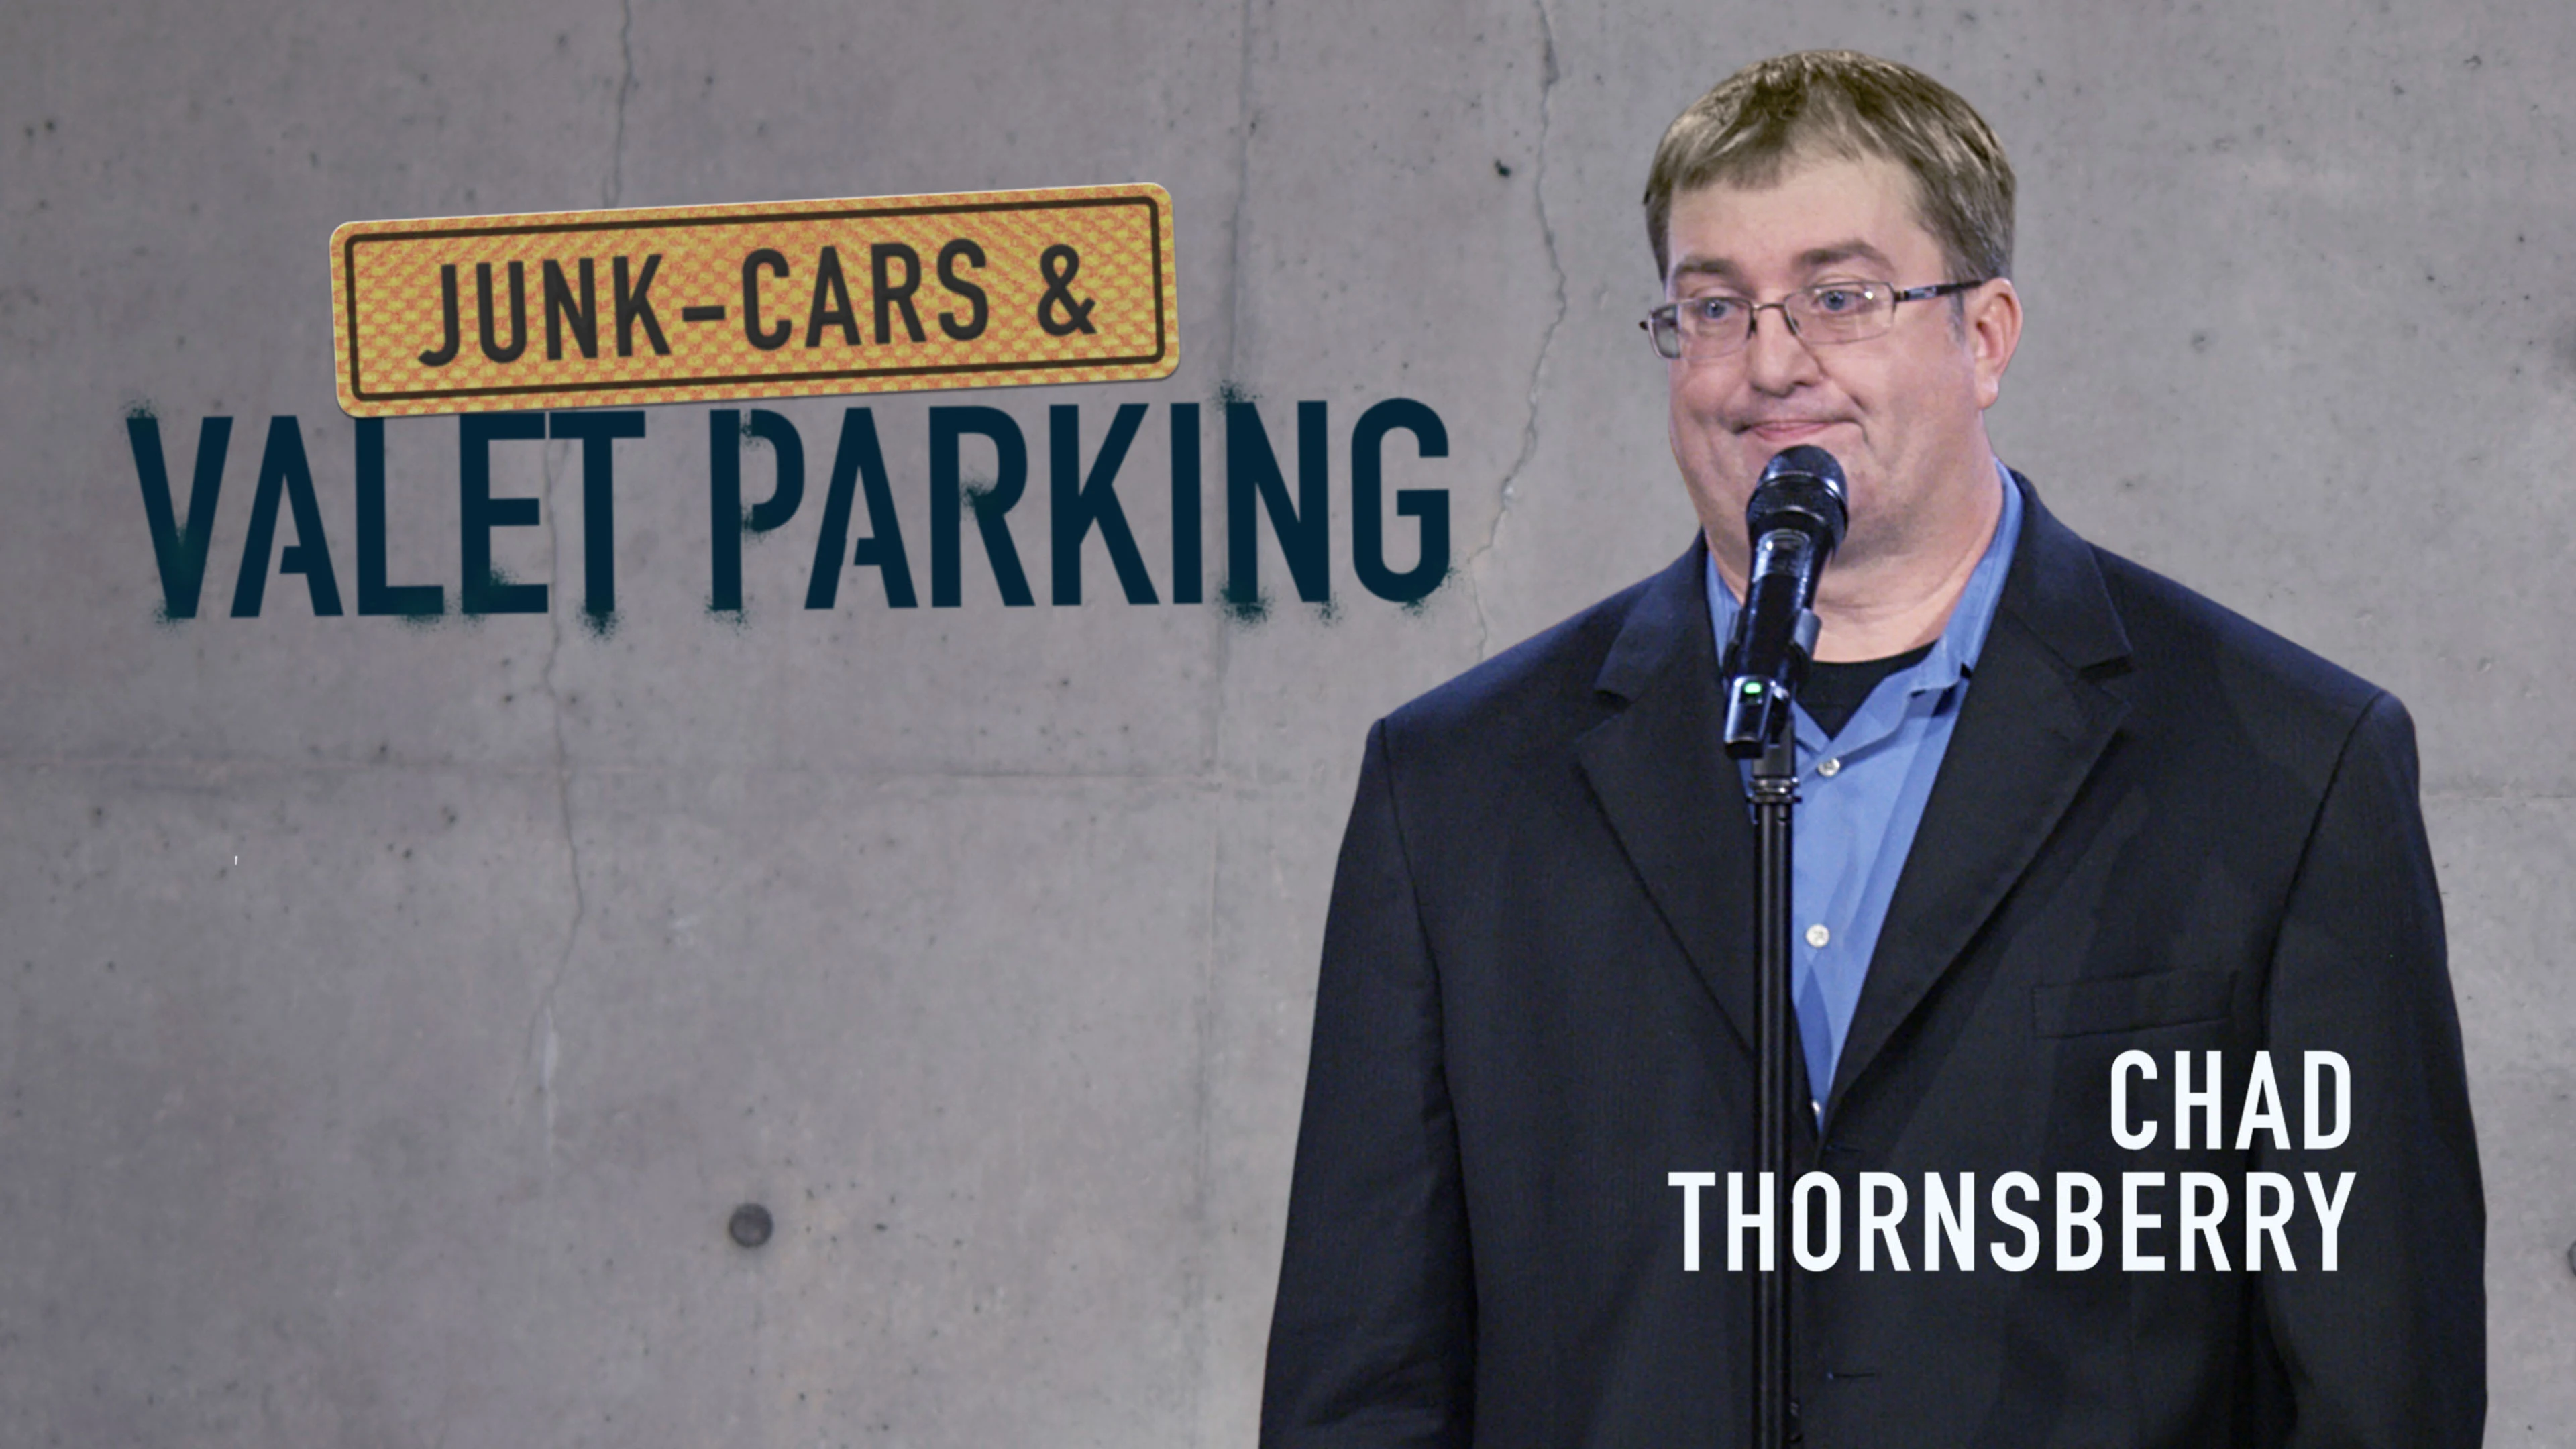 Chad Thornsberry - Junk-Cars and Valet Parking